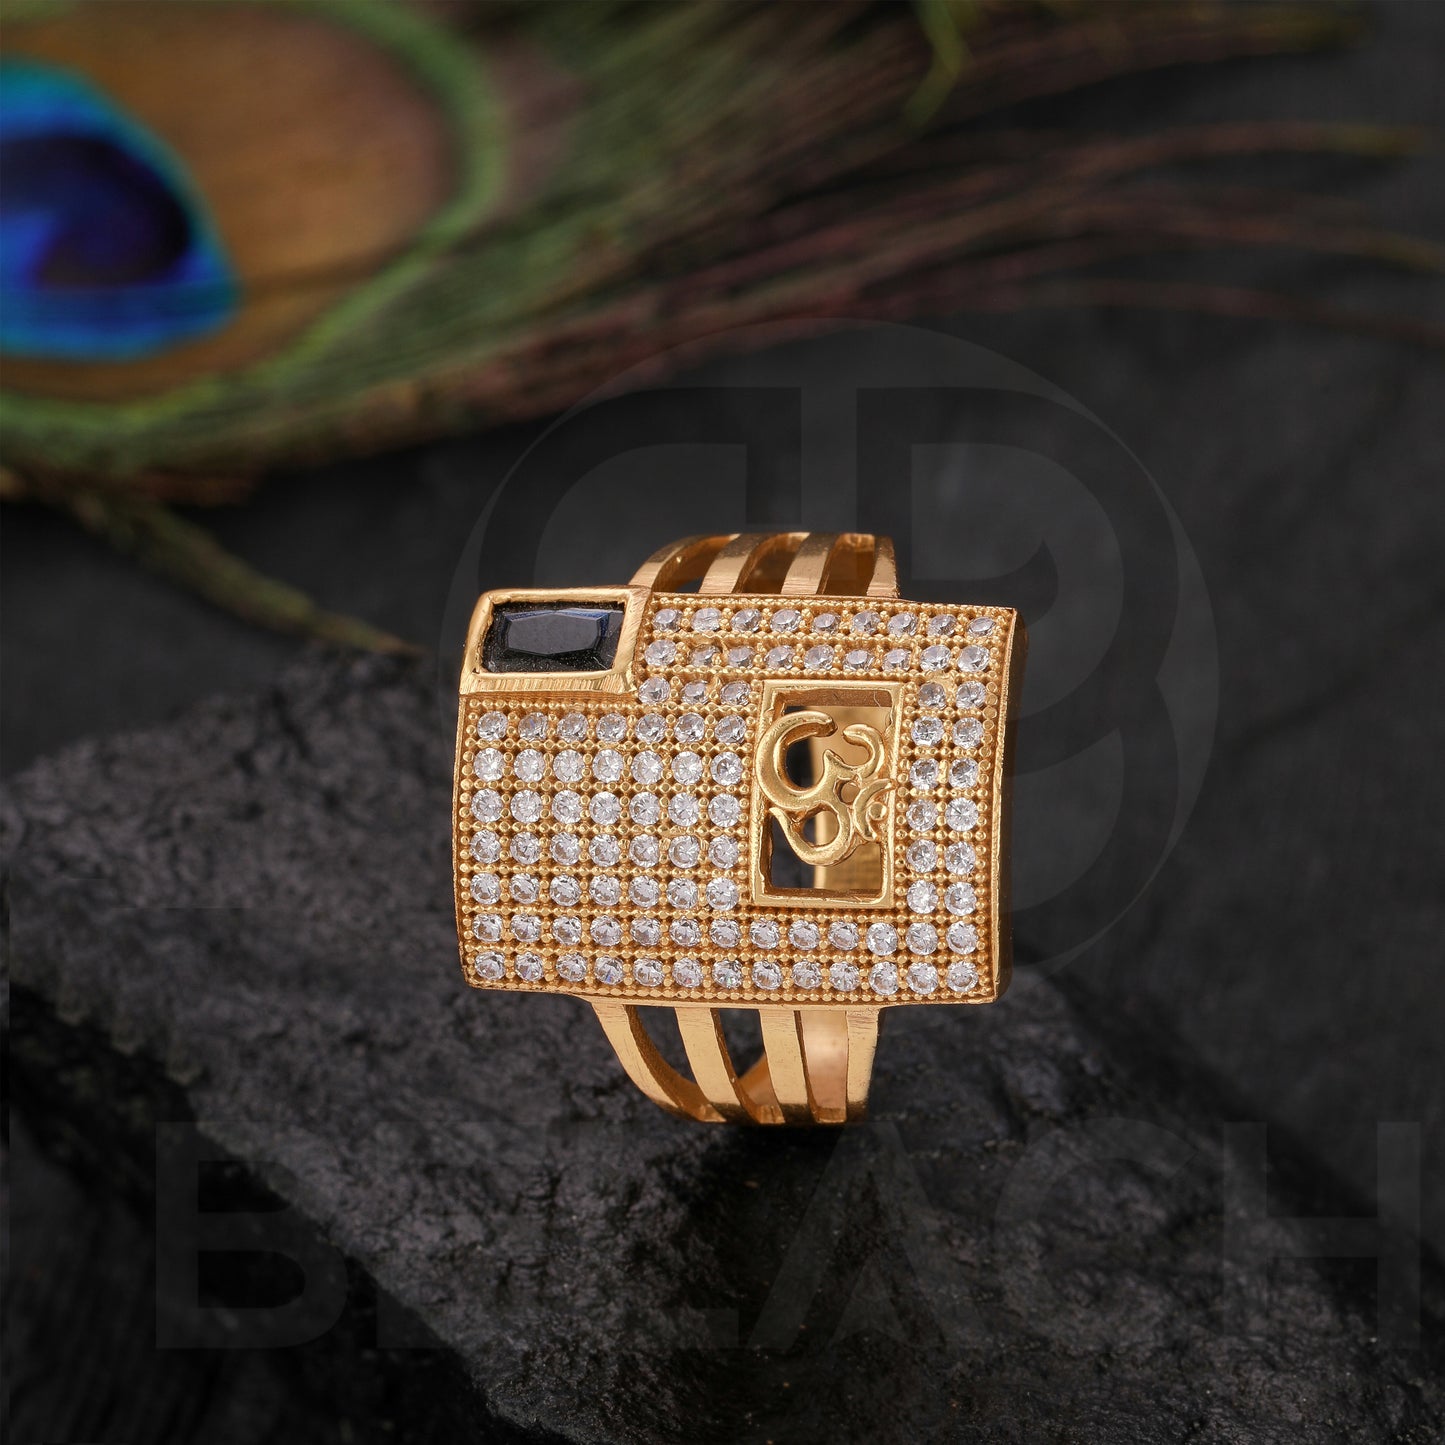 GOLD PLATED BLACK STONE RING GPSR049